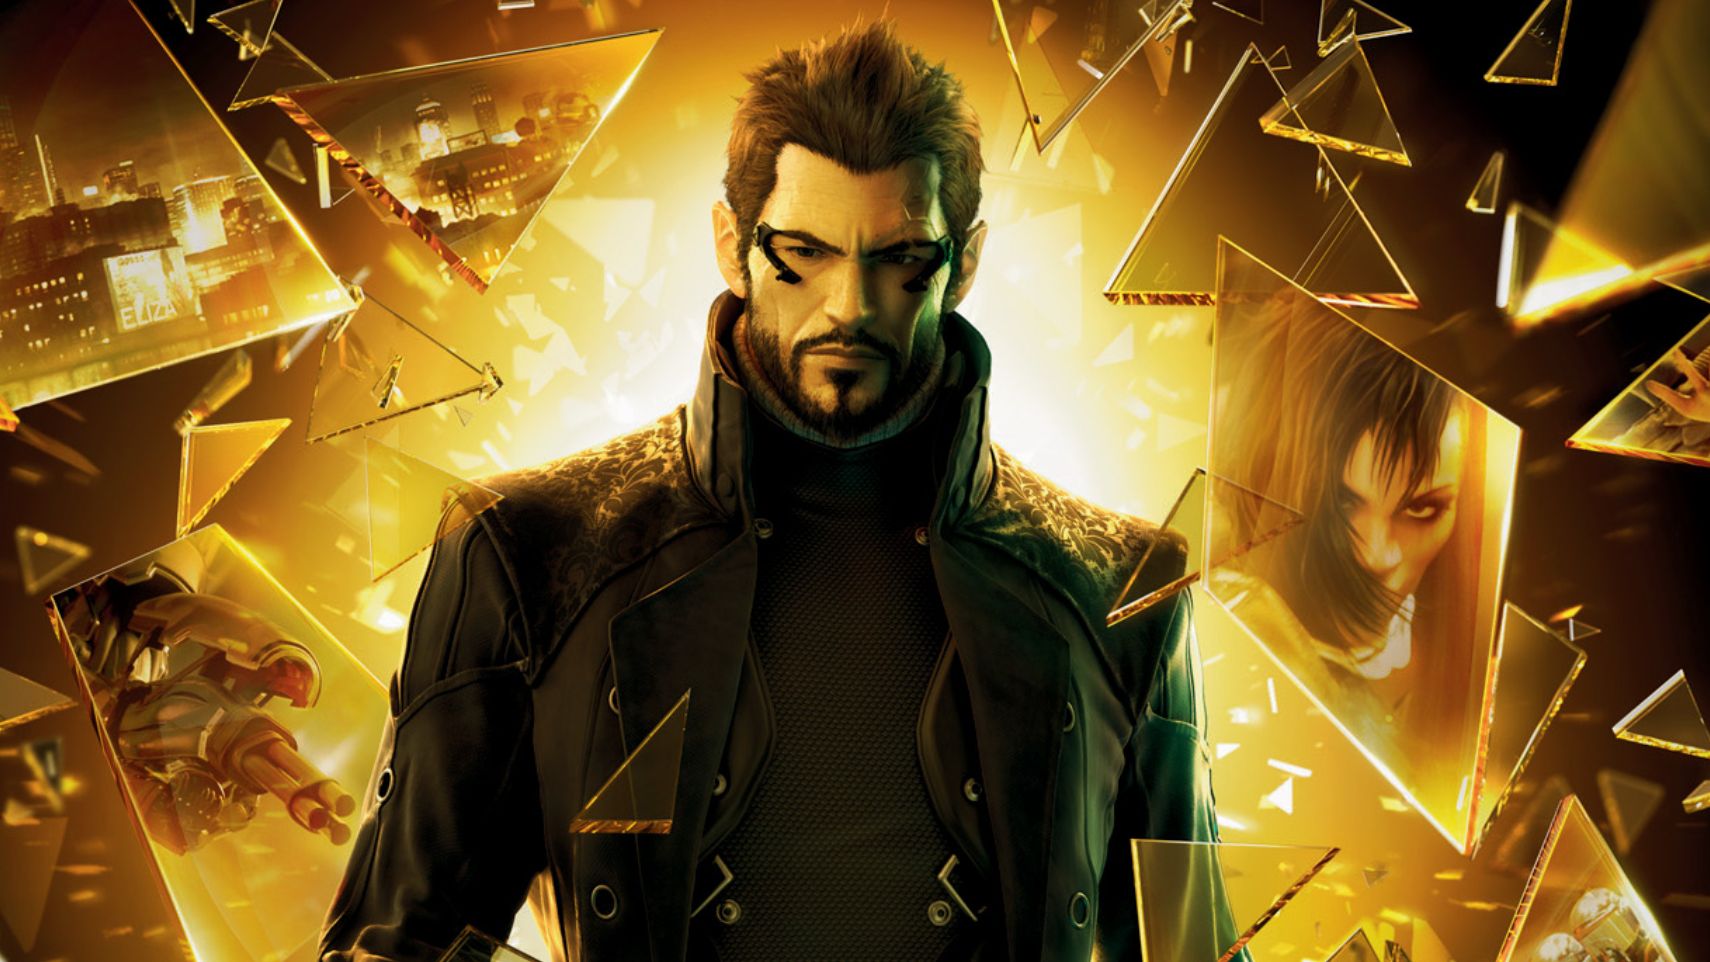 Here's a patch to give Deus Ex: Human Revolution—Director's Cut back its gold filter